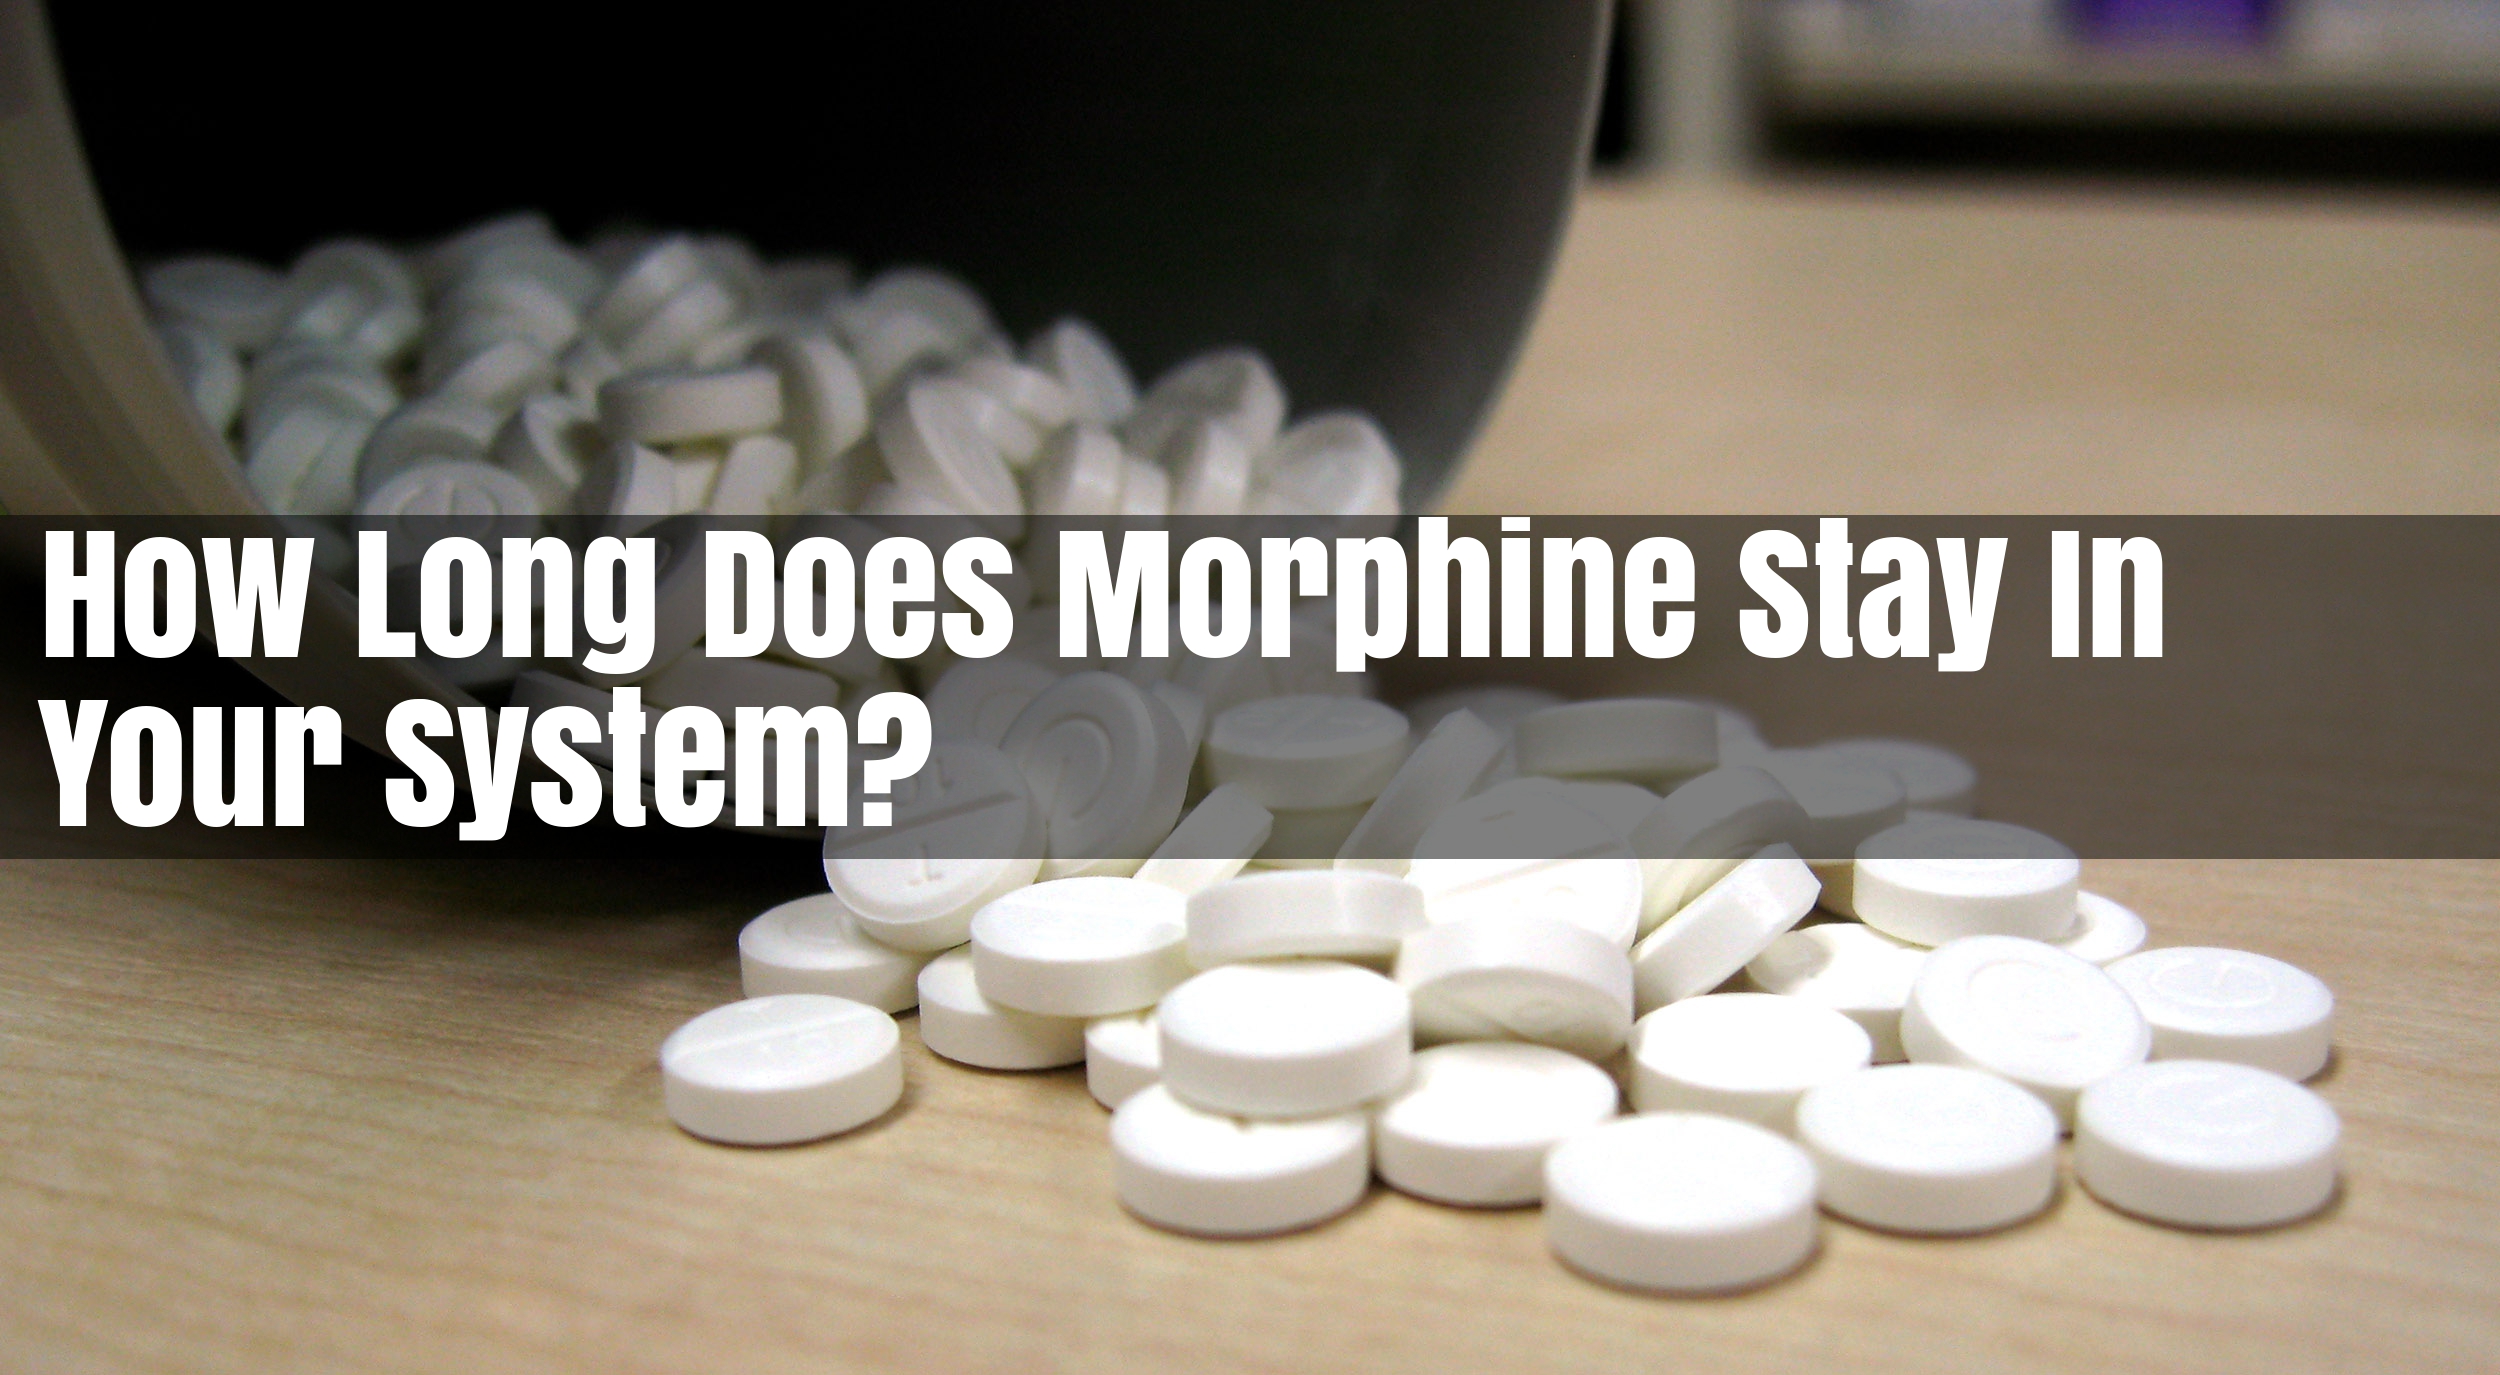 How Long Does Morphine Stay In Your System?